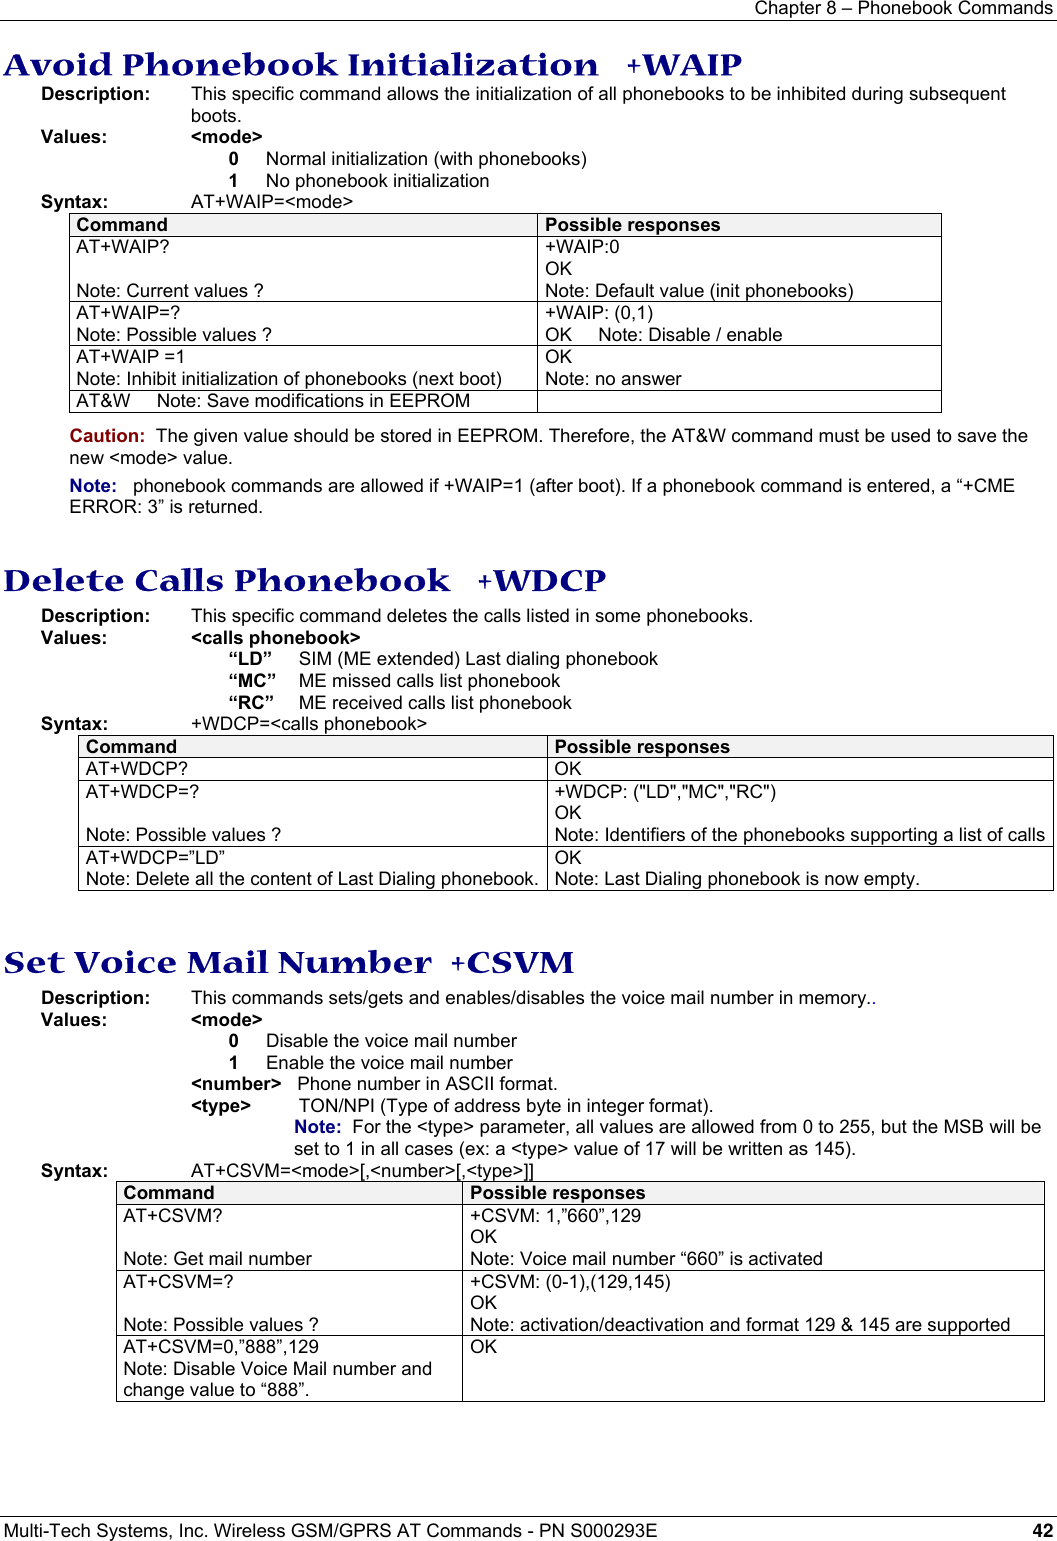 Chapter 8 – Phonebook Commands  Multi-Tech Systems, Inc. Wireless GSM/GPRS AT Commands - PN S000293E 42  Avoid Phonebook Initialization   +WAIP Description:  This specific command allows the initialization of all phonebooks to be inhibited during subsequent boots.  Values: &lt;mode&gt;   0 Normal initialization (with phonebooks)  1  No phonebook initialization Syntax:    AT+WAIP=&lt;mode&gt; Command  Possible responses AT+WAIP?  Note: Current values ? +WAIP:0 OK Note: Default value (init phonebooks) AT+WAIP=? Note: Possible values ? +WAIP: (0,1) OK     Note: Disable / enable AT+WAIP =1 Note: Inhibit initialization of phonebooks (next boot) OK Note: no answer AT&amp;W     Note: Save modifications in EEPROM   Caution:  The given value should be stored in EEPROM. Therefore, the AT&amp;W command must be used to save the new &lt;mode&gt; value. Note:   phonebook commands are allowed if +WAIP=1 (after boot). If a phonebook command is entered, a “+CME ERROR: 3” is returned.  Delete Calls Phonebook   +WDCP Description:  This specific command deletes the calls listed in some phonebooks. Values: &lt;calls phonebook&gt;  “LD” SIM (ME extended) Last dialing phonebook  “MC” ME missed calls list phonebook  “RC” ME received calls list phonebook Syntax:      +WDCP=&lt;calls phonebook&gt; Command  Possible responses AT+WDCP? OK AT+WDCP=?  Note: Possible values ? +WDCP: (&quot;LD&quot;,&quot;MC&quot;,&quot;RC&quot;) OK      Note: Identifiers of the phonebooks supporting a list of callsAT+WDCP=”LD” Note: Delete all the content of Last Dialing phonebook.OK Note: Last Dialing phonebook is now empty.   Set Voice Mail Number  +CSVM Description:  This commands sets/gets and enables/disables the voice mail number in memory.. Values: &lt;mode&gt;   0  Disable the voice mail number  1  Enable the voice mail number  &lt;number&gt;   Phone number in ASCII format.   &lt;type&gt;     TON/NPI (Type of address byte in integer format).  Note:  For the &lt;type&gt; parameter, all values are allowed from 0 to 255, but the MSB will be set to 1 in all cases (ex: a &lt;type&gt; value of 17 will be written as 145). Syntax:     AT+CSVM=&lt;mode&gt;[,&lt;number&gt;[,&lt;type&gt;]] Command  Possible responses AT+CSVM?  Note: Get mail number +CSVM: 1,”660”,129 OK Note: Voice mail number “660” is activated AT+CSVM=?  Note: Possible values ? +CSVM: (0-1),(129,145) OK Note: activation/deactivation and format 129 &amp; 145 are supported AT+CSVM=0,”888”,129 Note: Disable Voice Mail number and change value to “888”. OK  